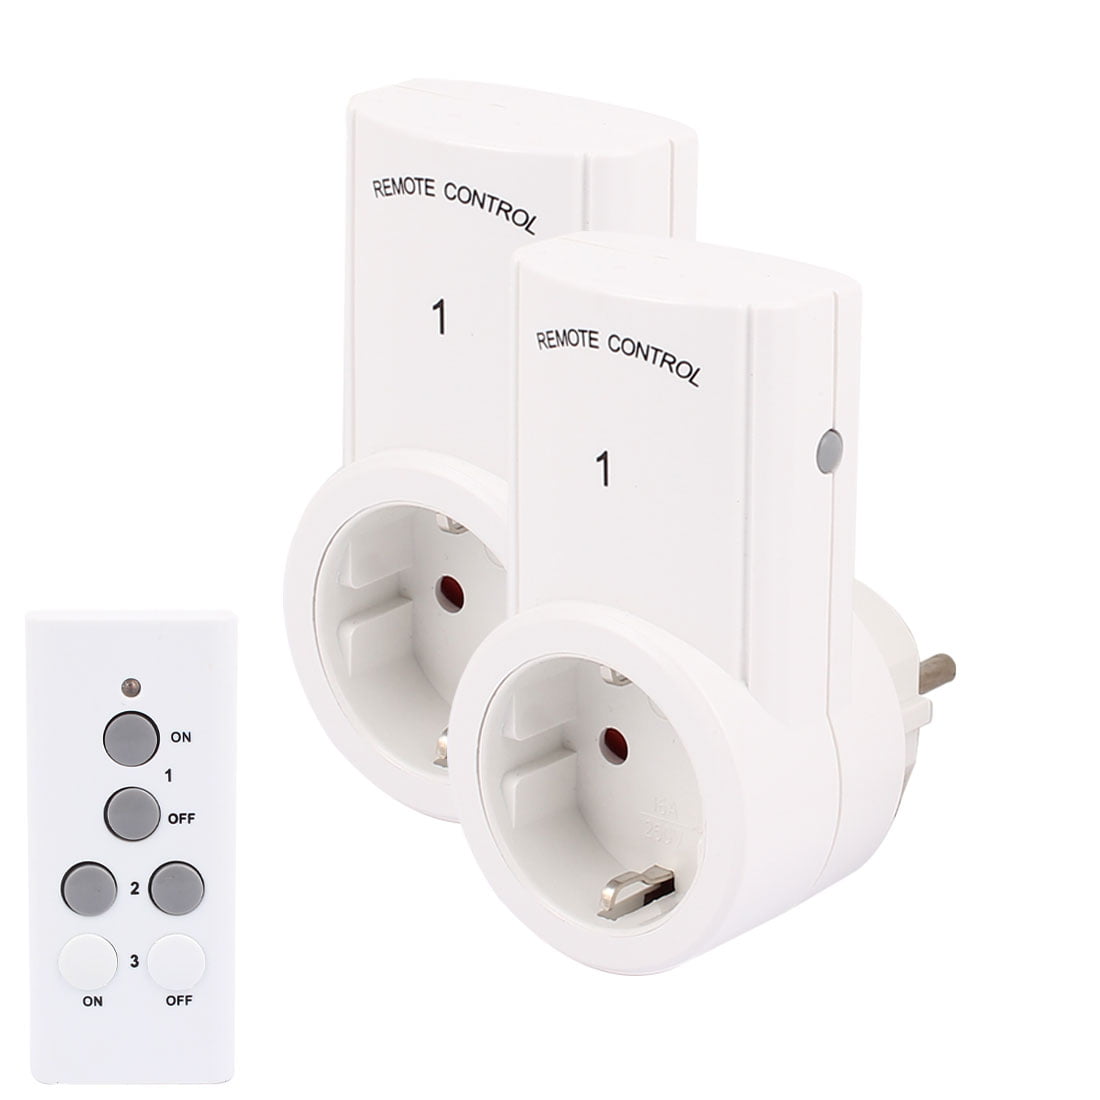 2x DOUBLE PLUG SOCKETS 2 Gang Switch White Plastic 10A Appliance Outlet Plates 